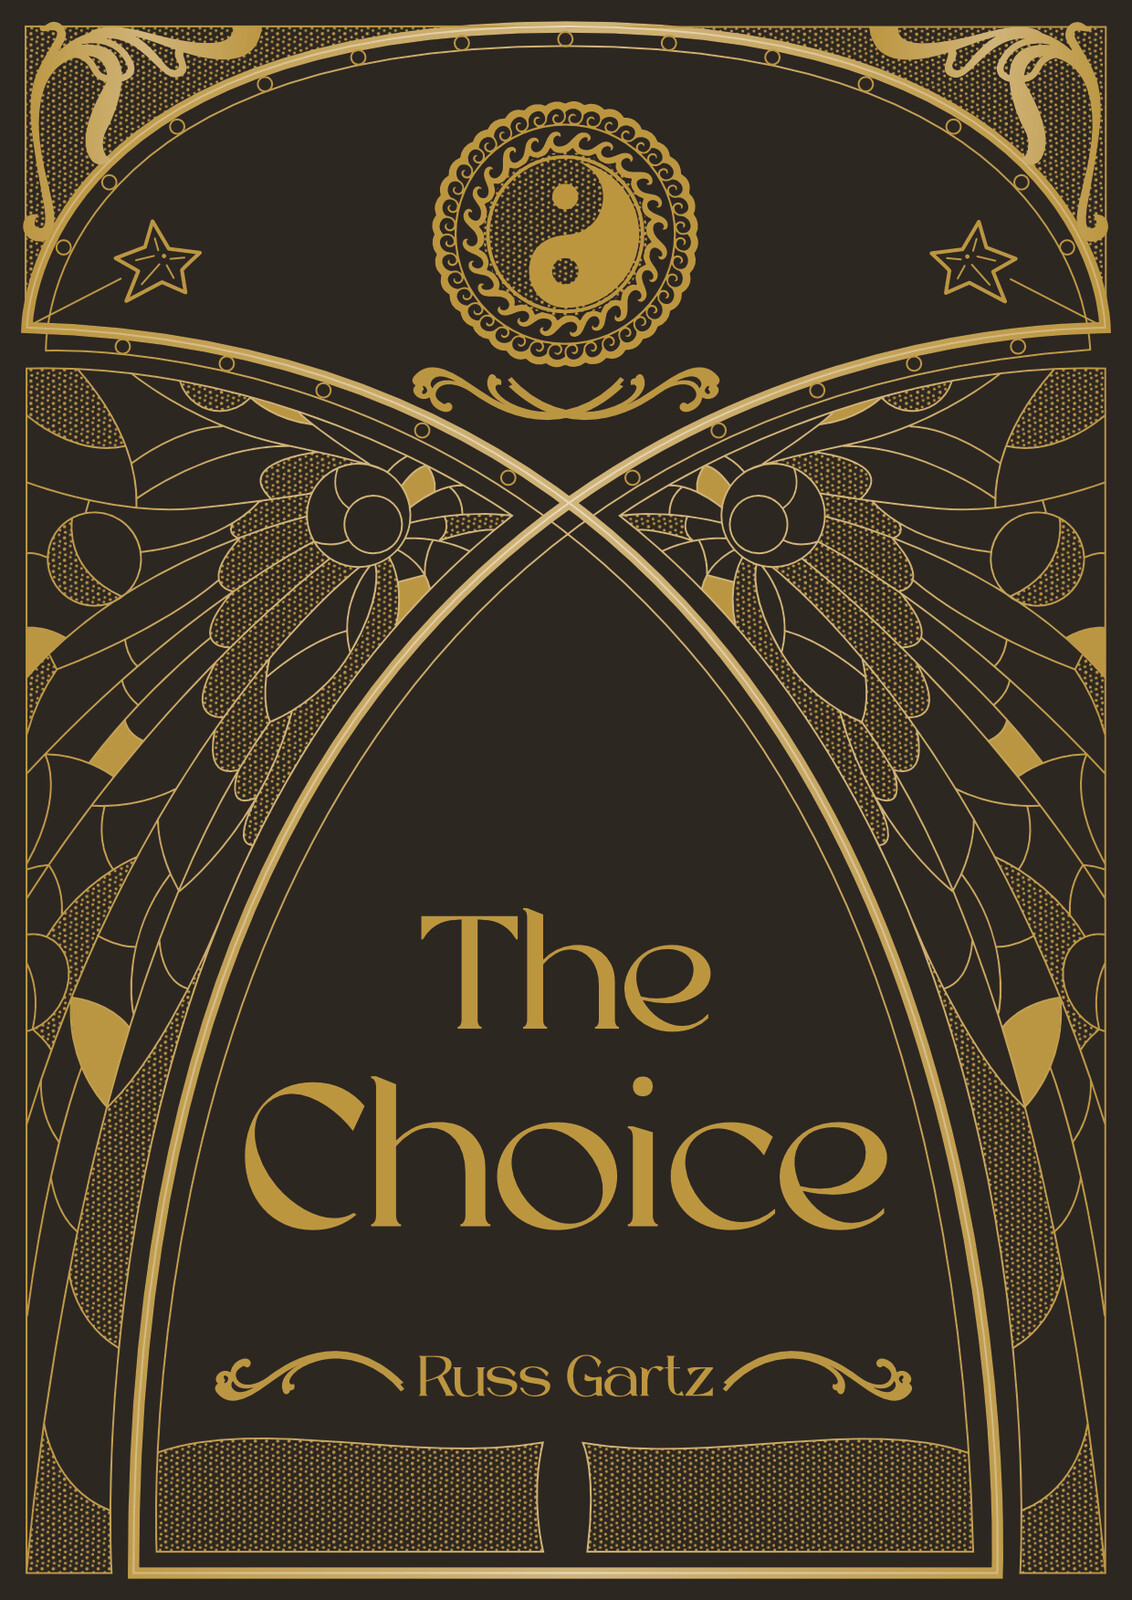 Alternate design choice for The Choice book cover.